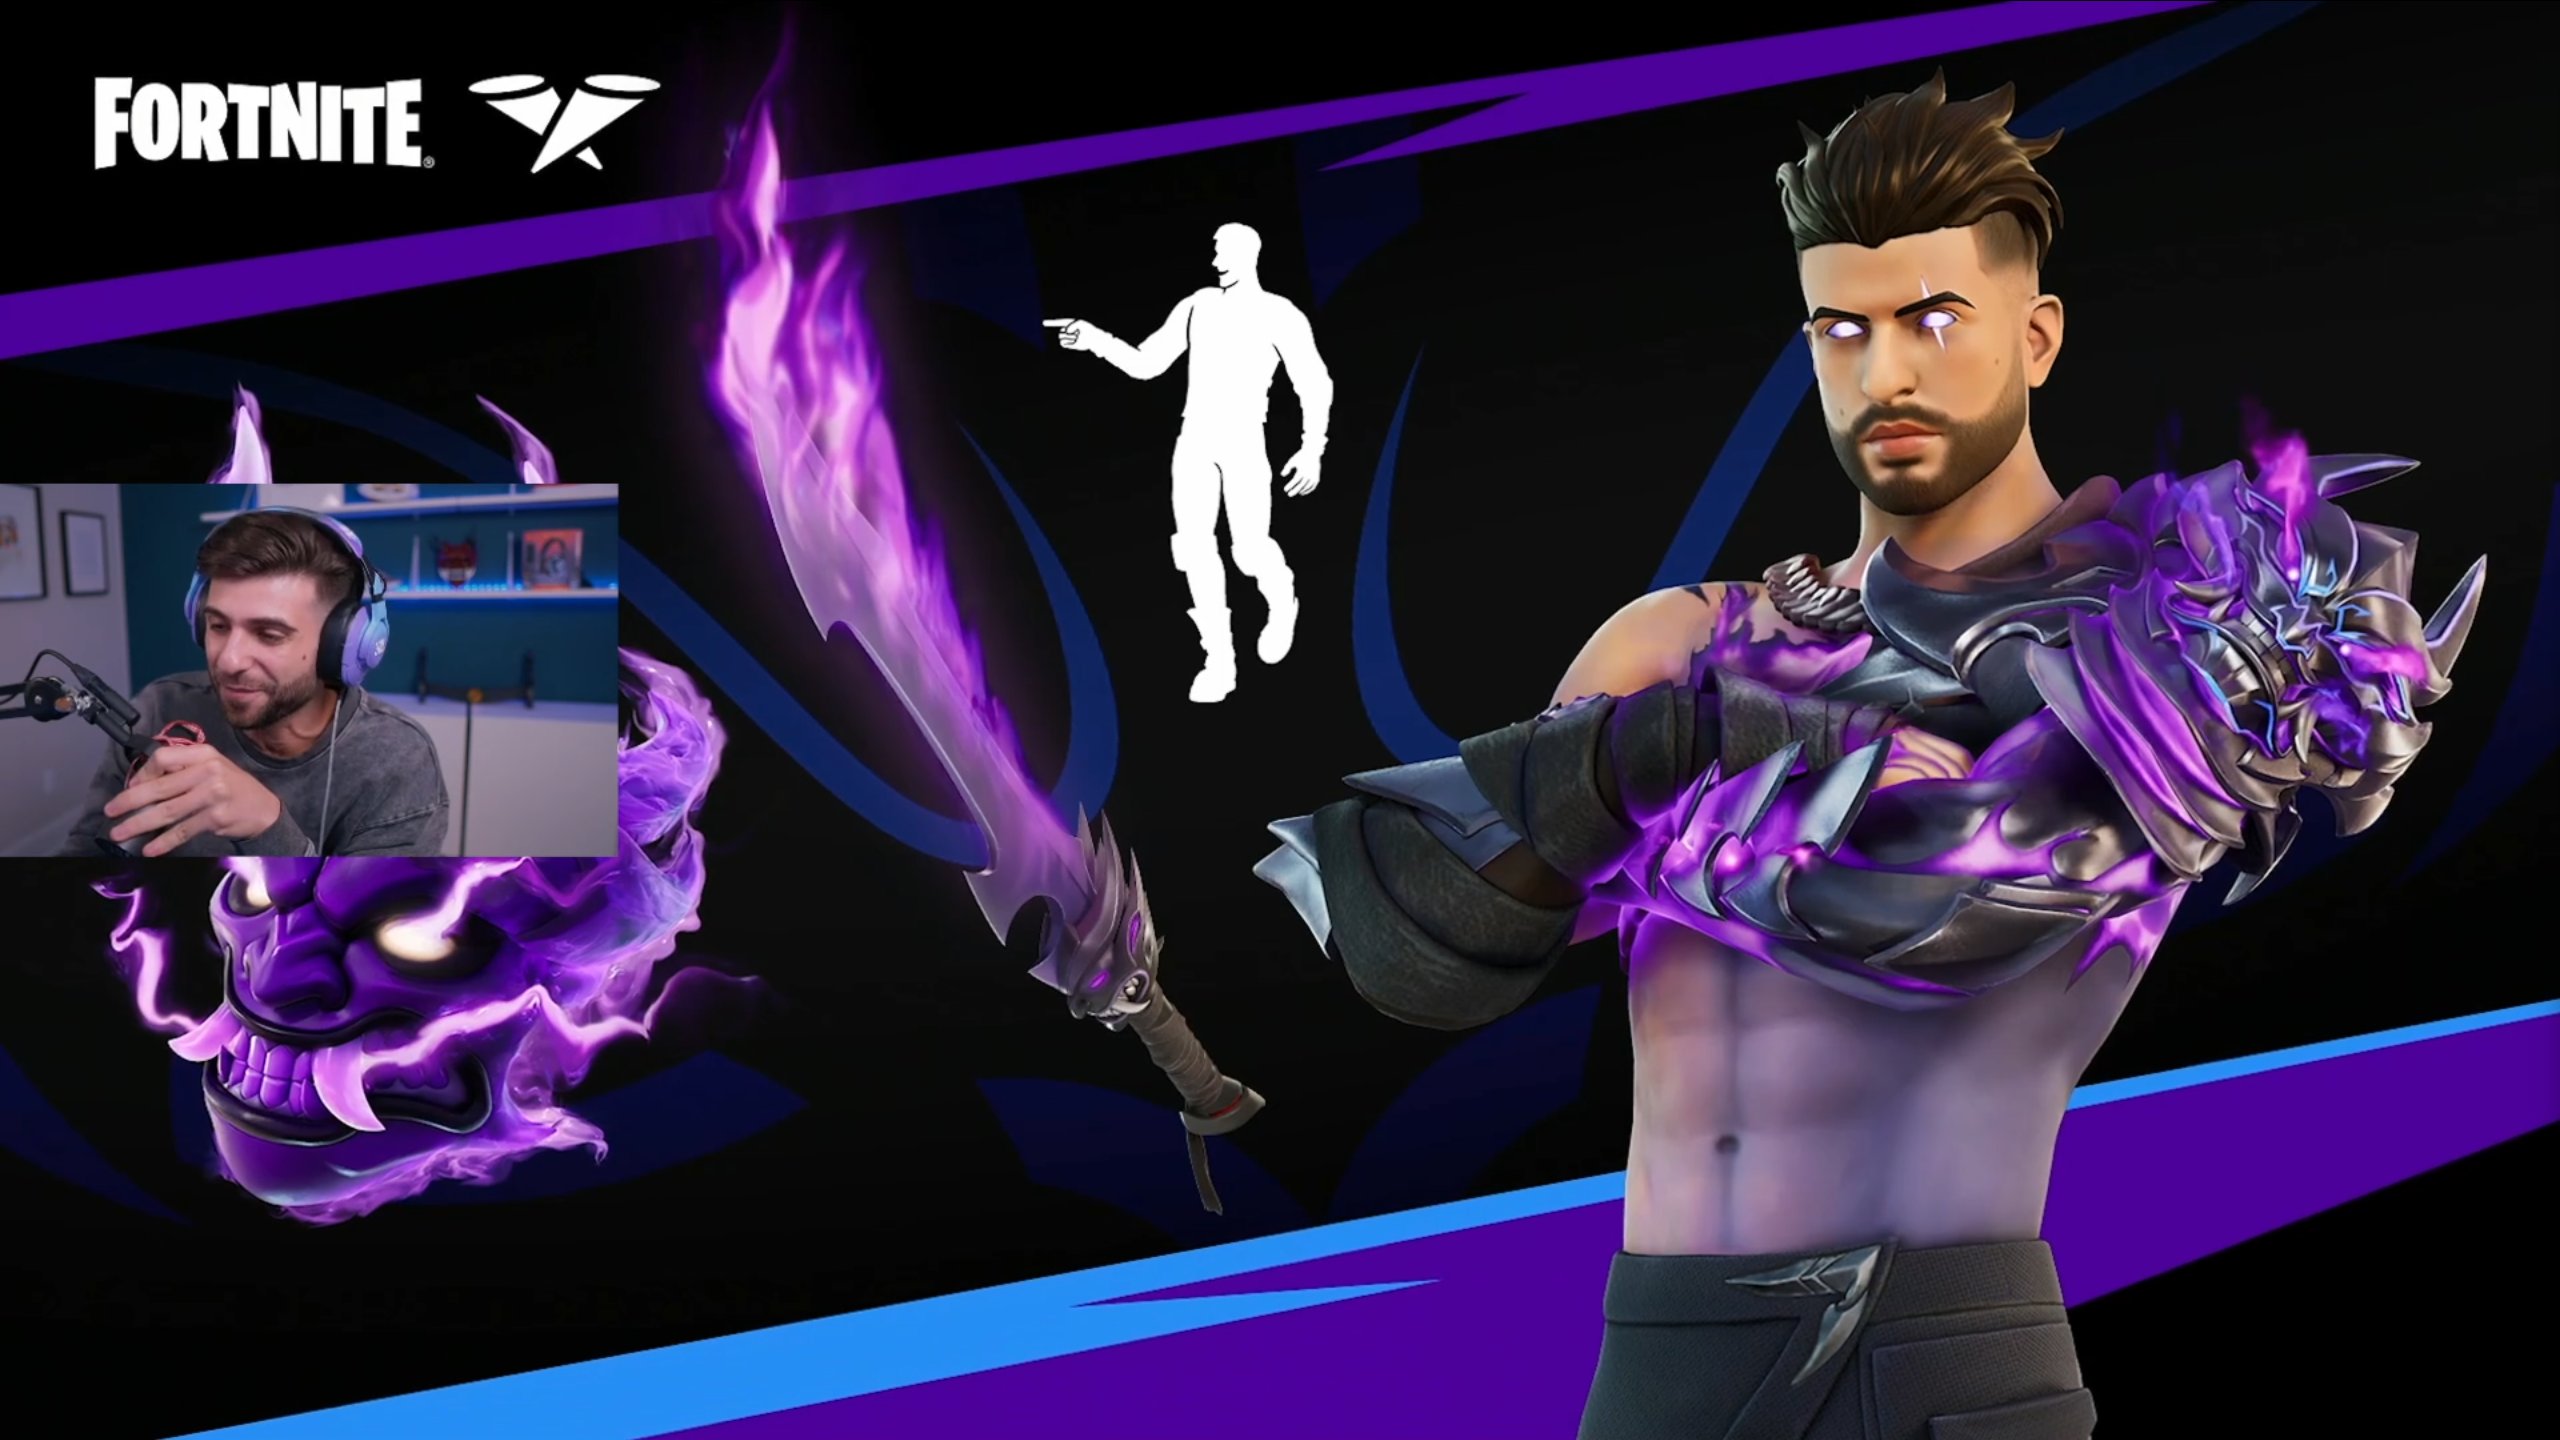 A promotional image from Fortnite showing SypherPK's skin with an oni shoulderpiece and energy flowing throughout the left arm